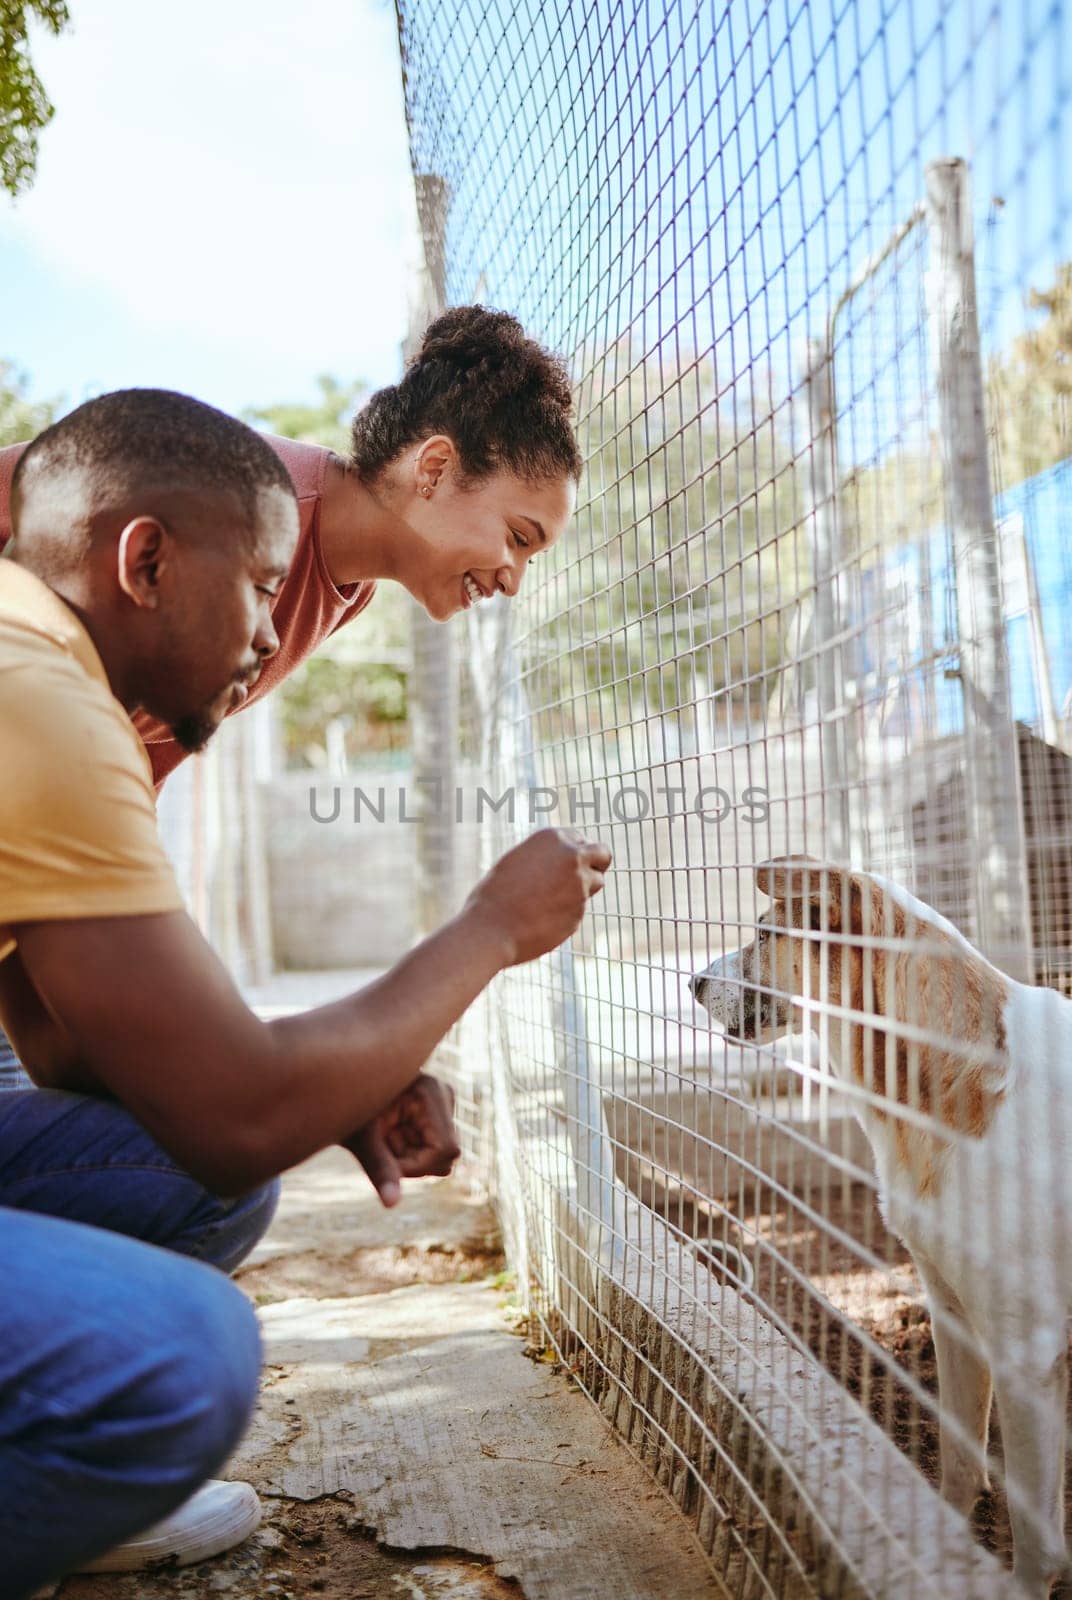 Love, dog and couple at an animal shelter for adoption at an outdoor rescue center or pound. Welfare, charity and young man and woman doing volunteer work with a foster puppy and pet at local kennel